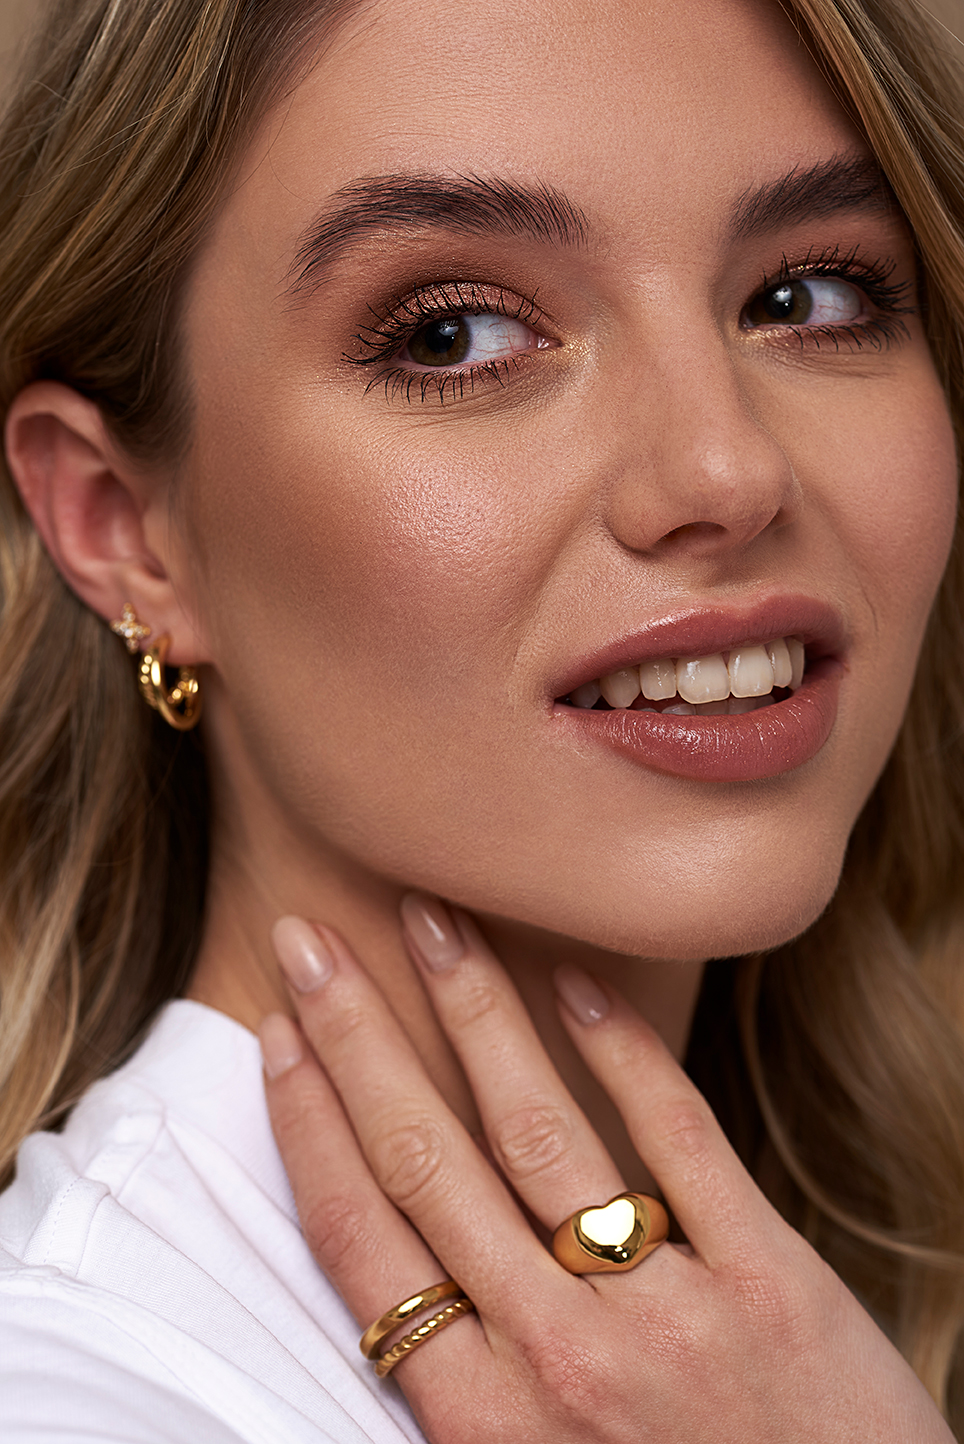 Model on a beige background, showcasing earrings and rings. Having her fingers placed on her chin so you can see the rings easy.